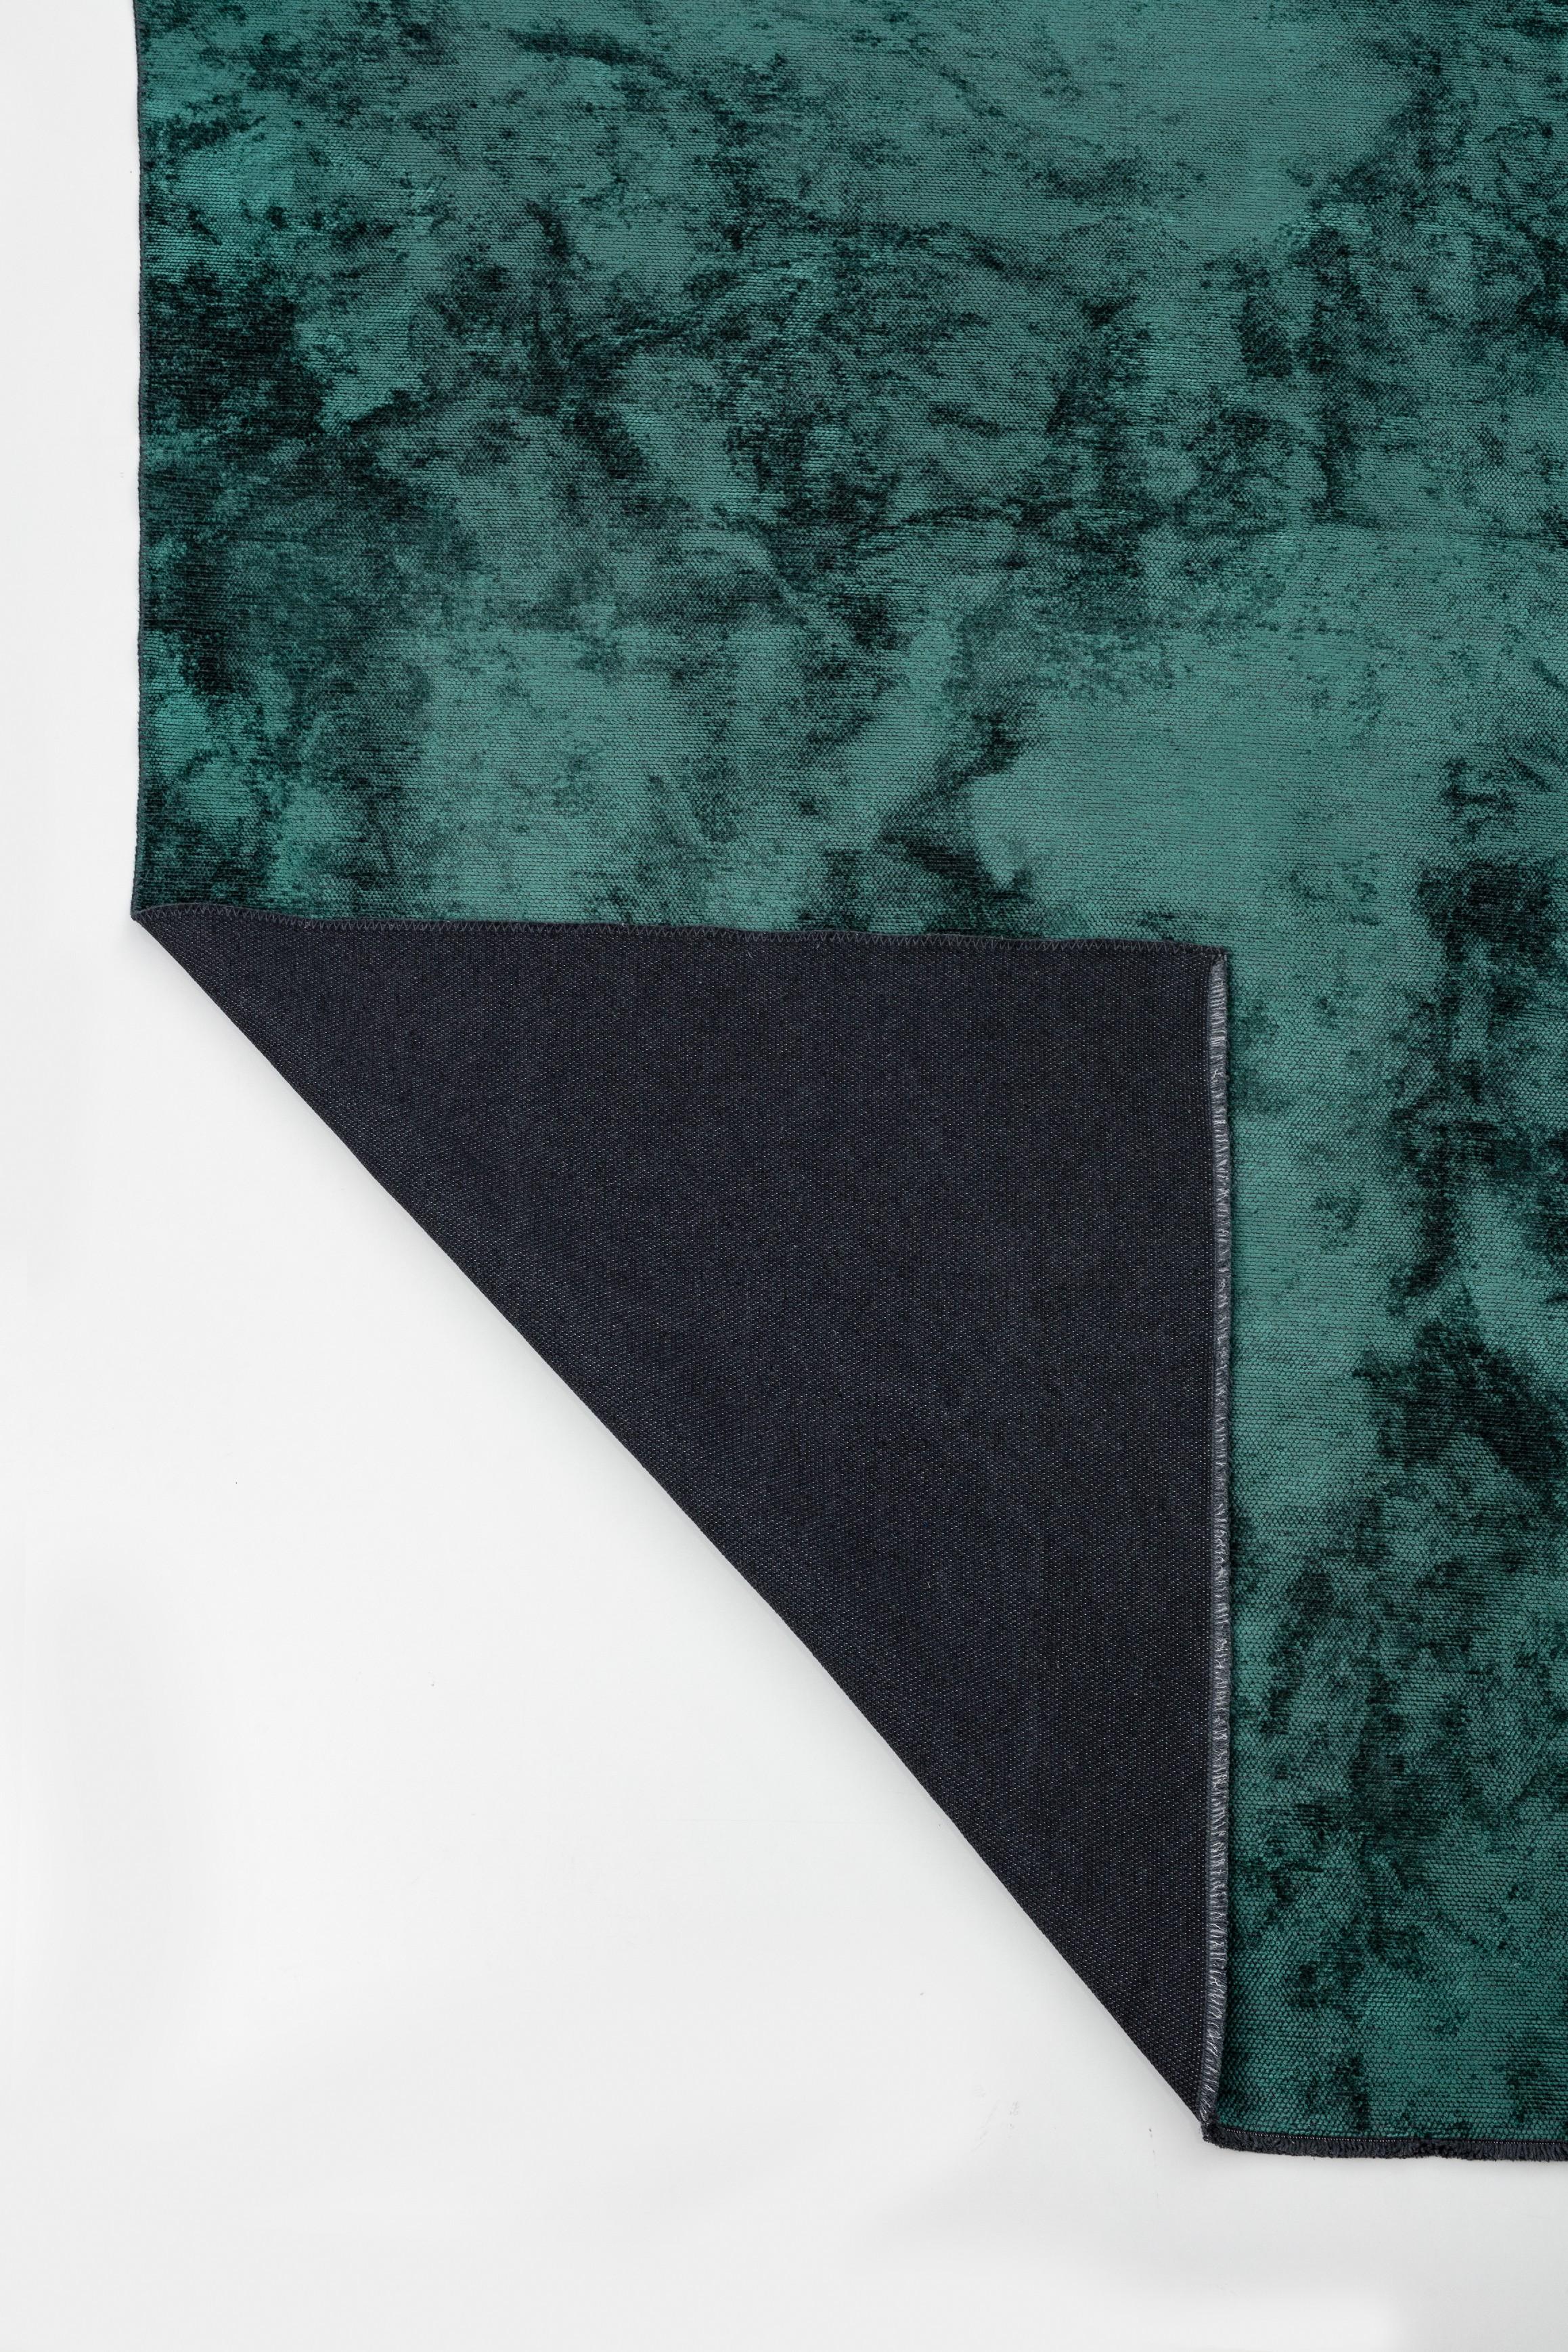 For Sale:  (Green) Modern Solid Color Luxury Area Rug 3